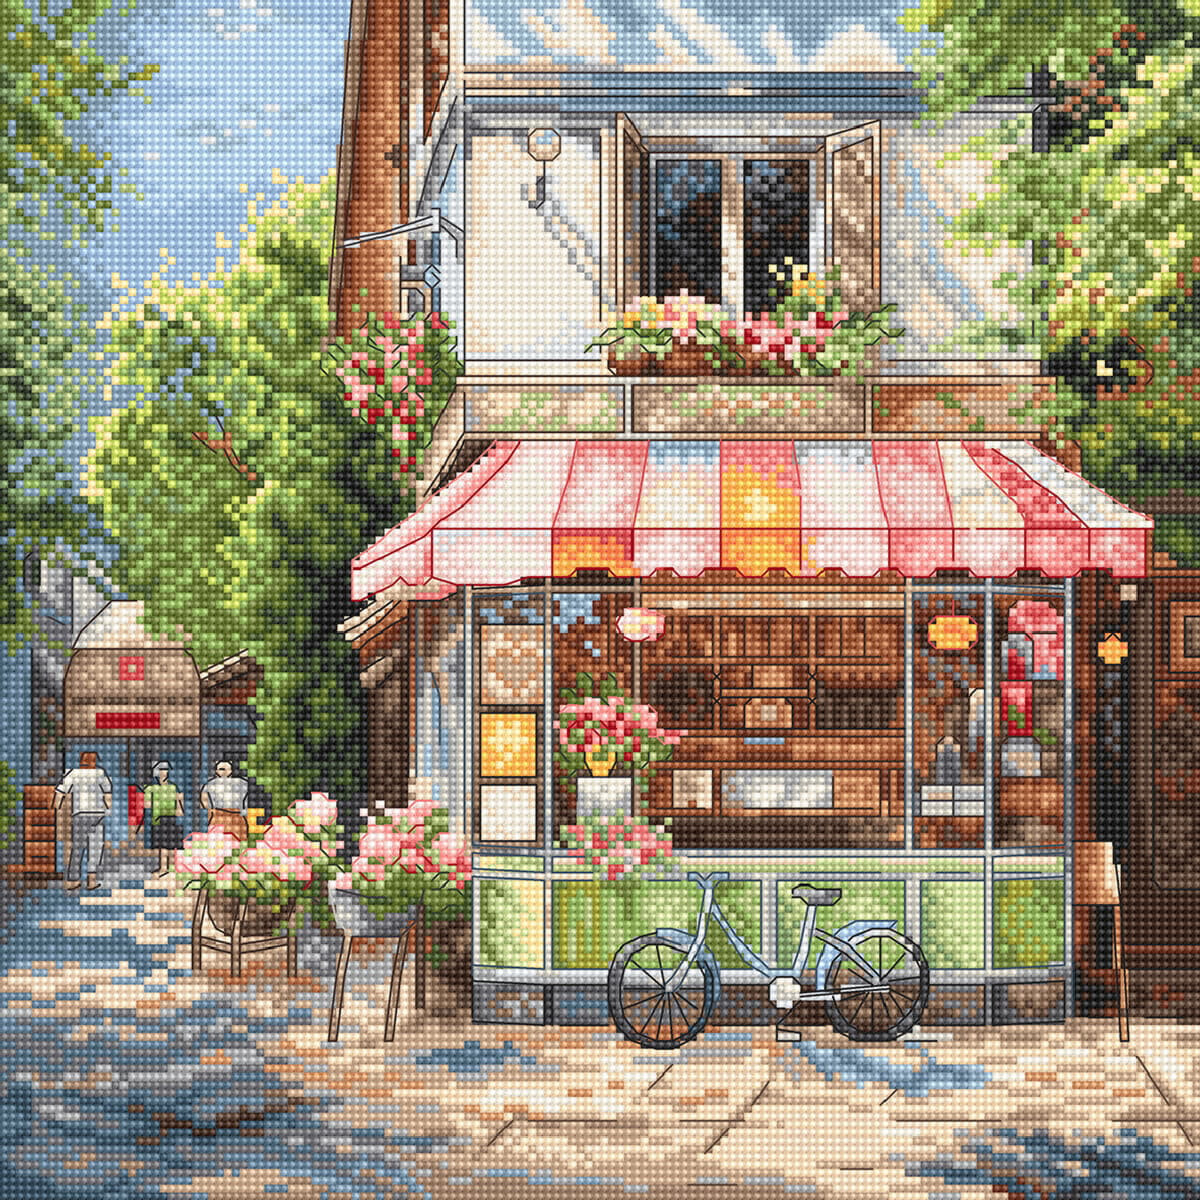 A vibrant, cross-stitched artwork of a charming street...